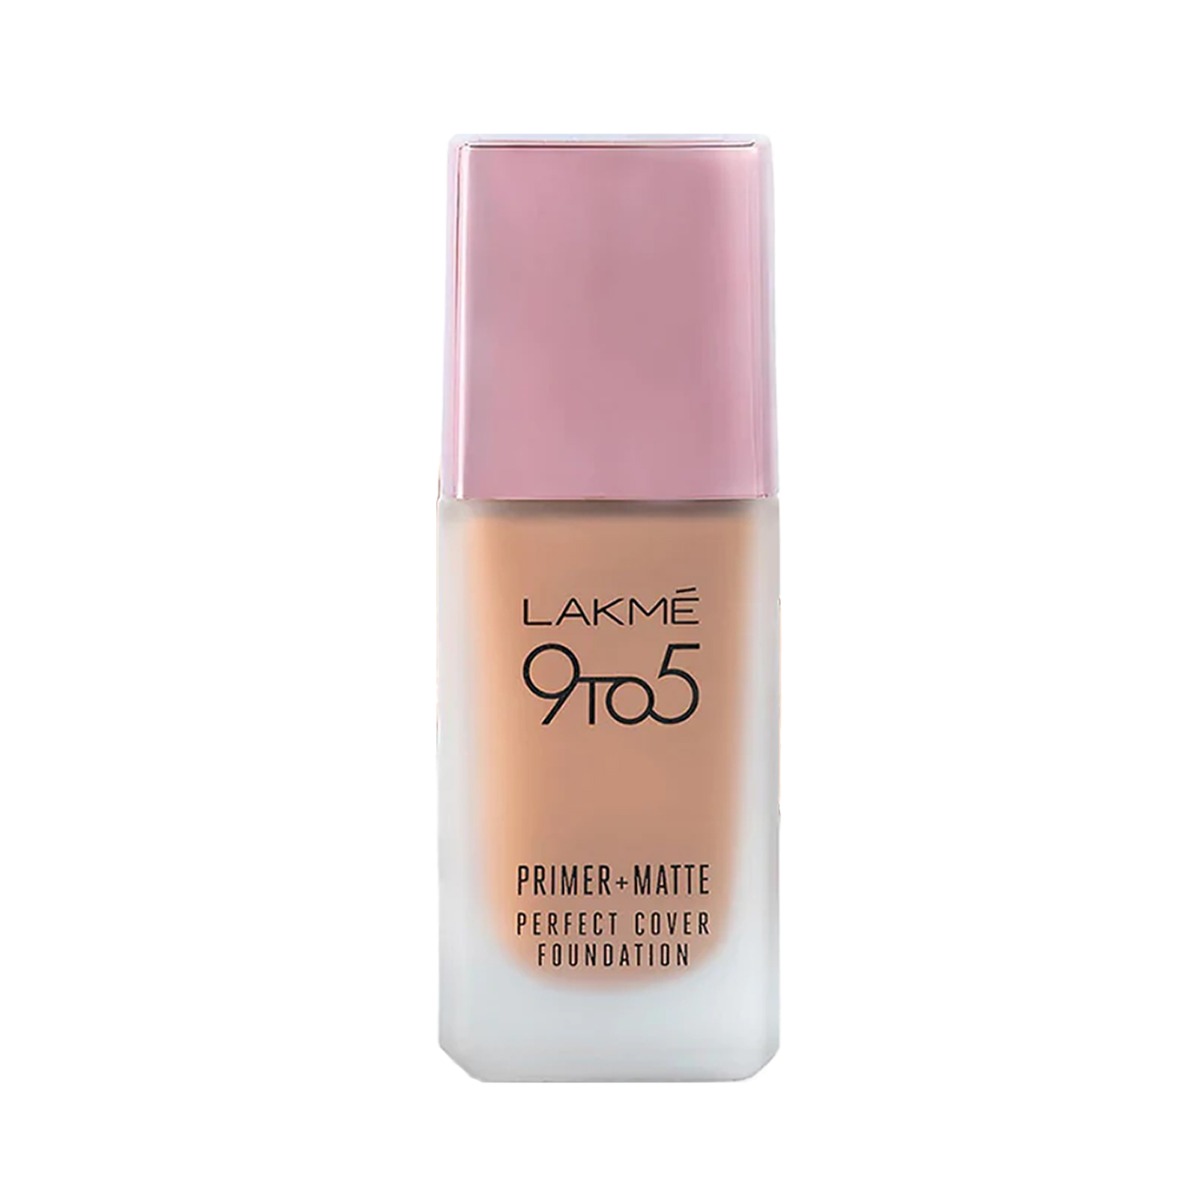 Lakme 9To5 Primer + Matte Perfect Cover Foundation, 25ml